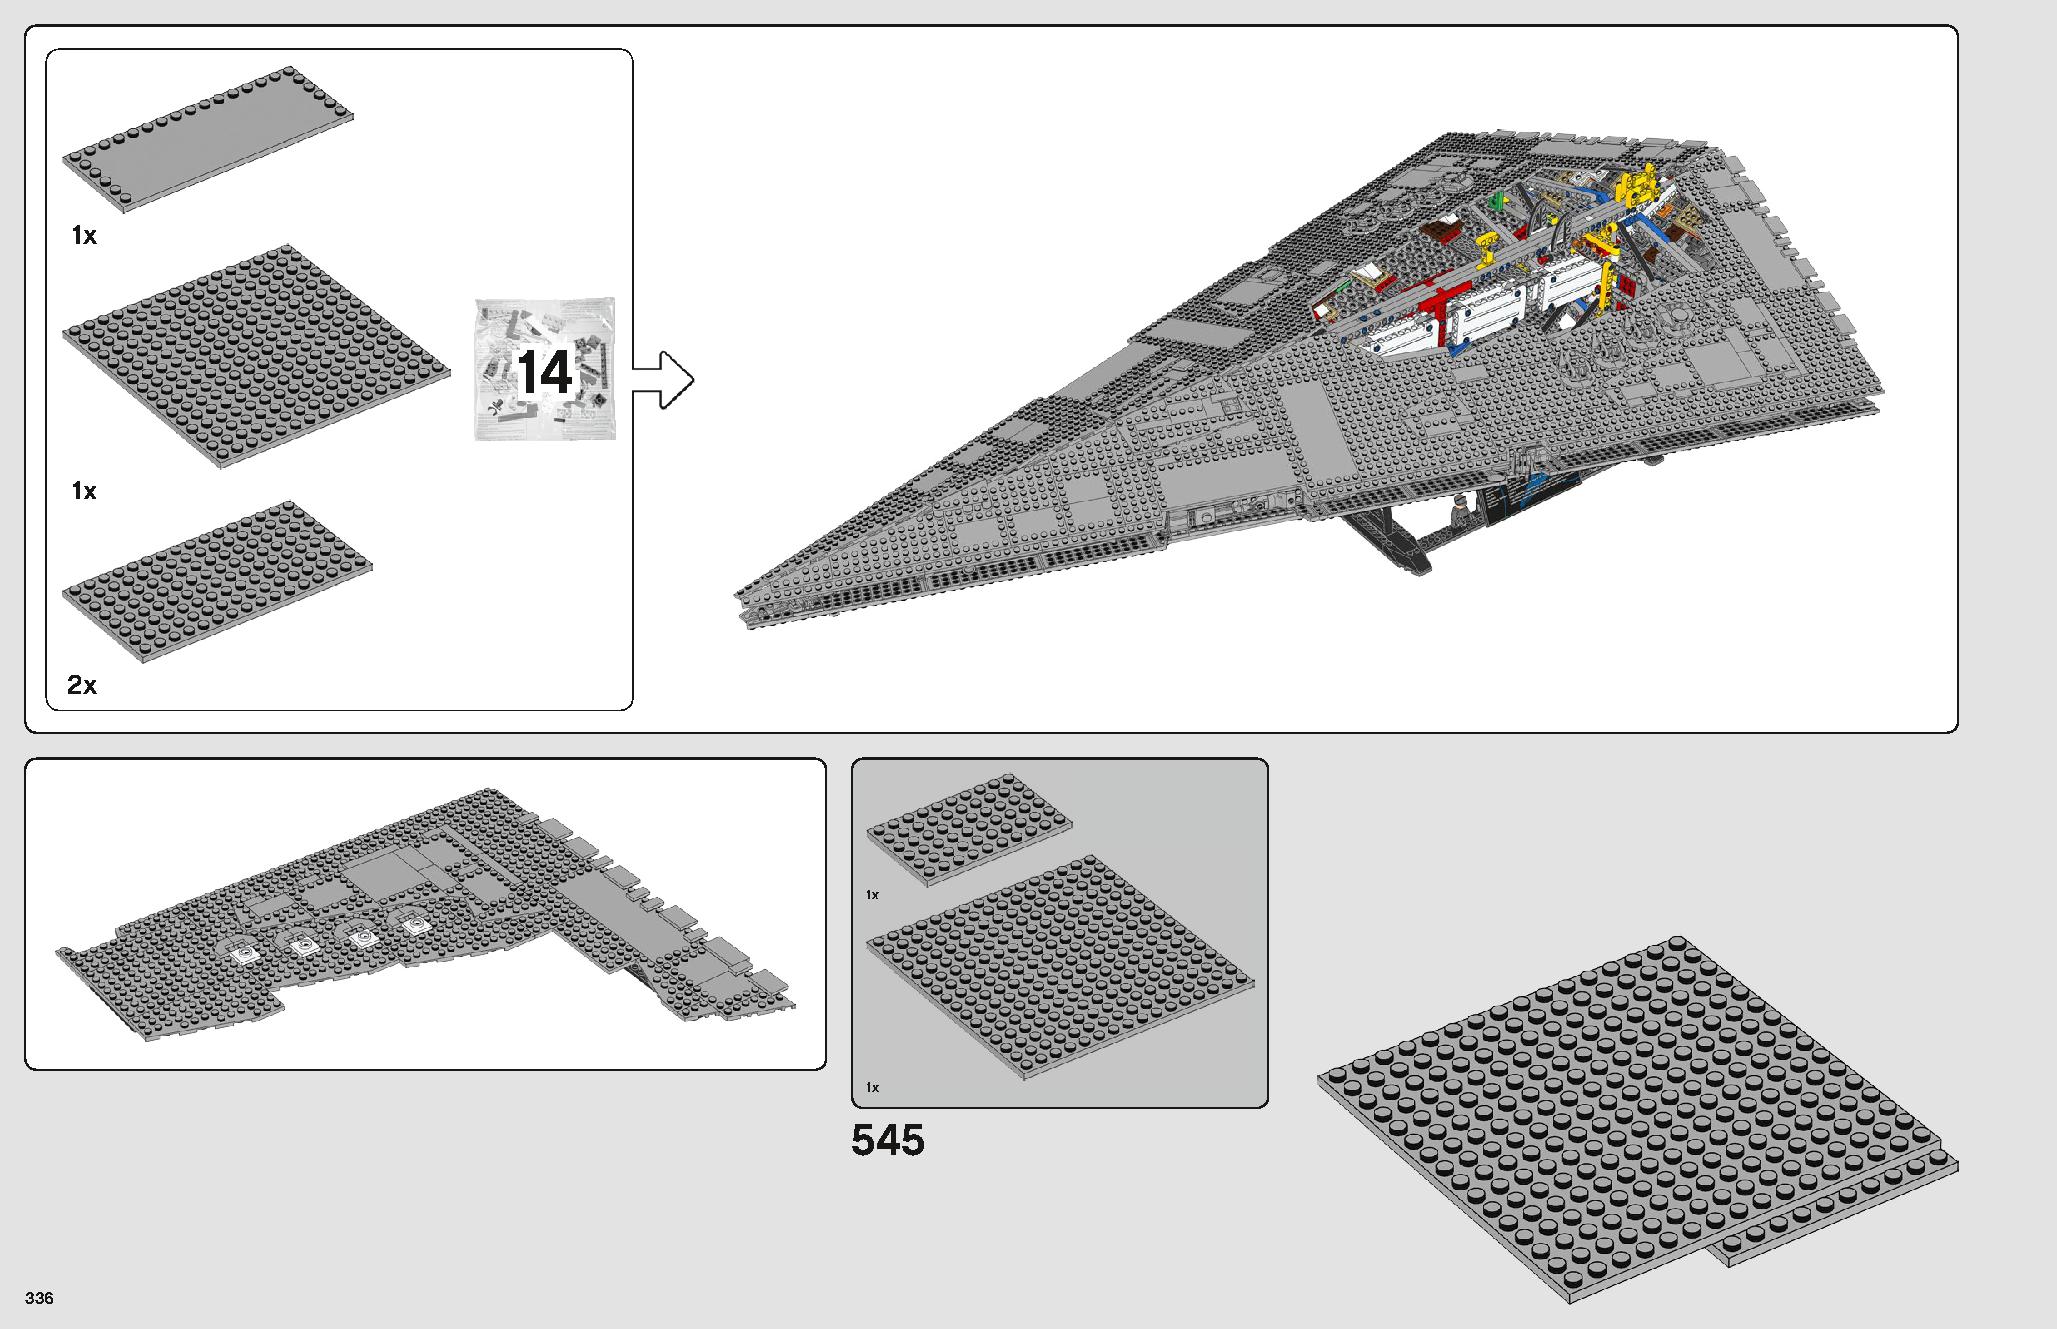 Imperial Star Destroyer 75252 レゴの商品情報 レゴの説明書・組立方法 336 page